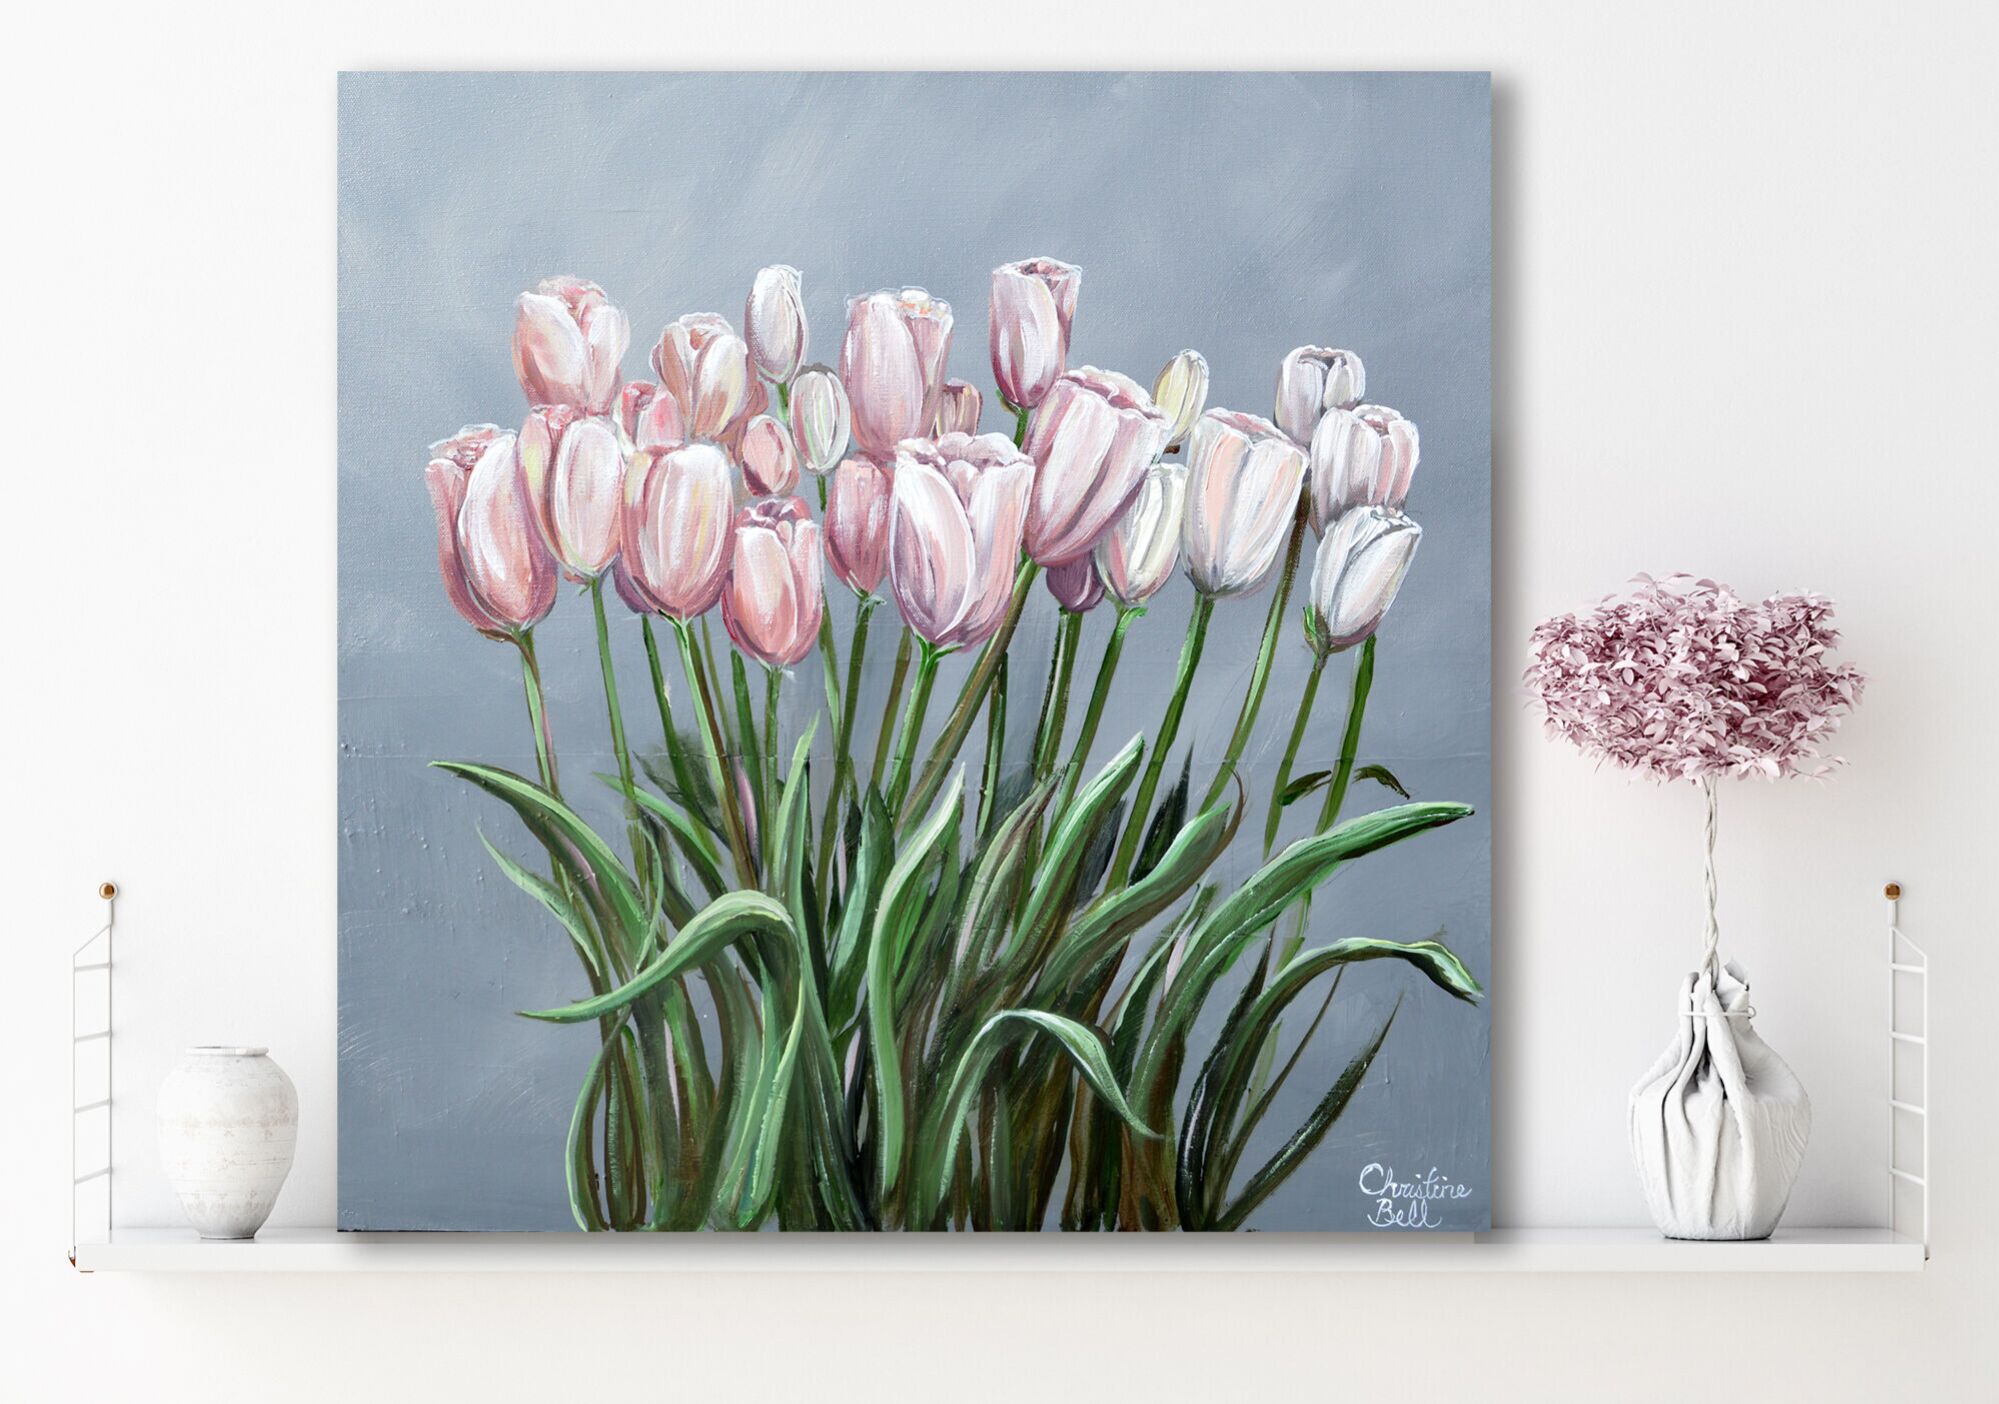 Shop: "Tip Toe Through the Tulips" Original Floral Painting